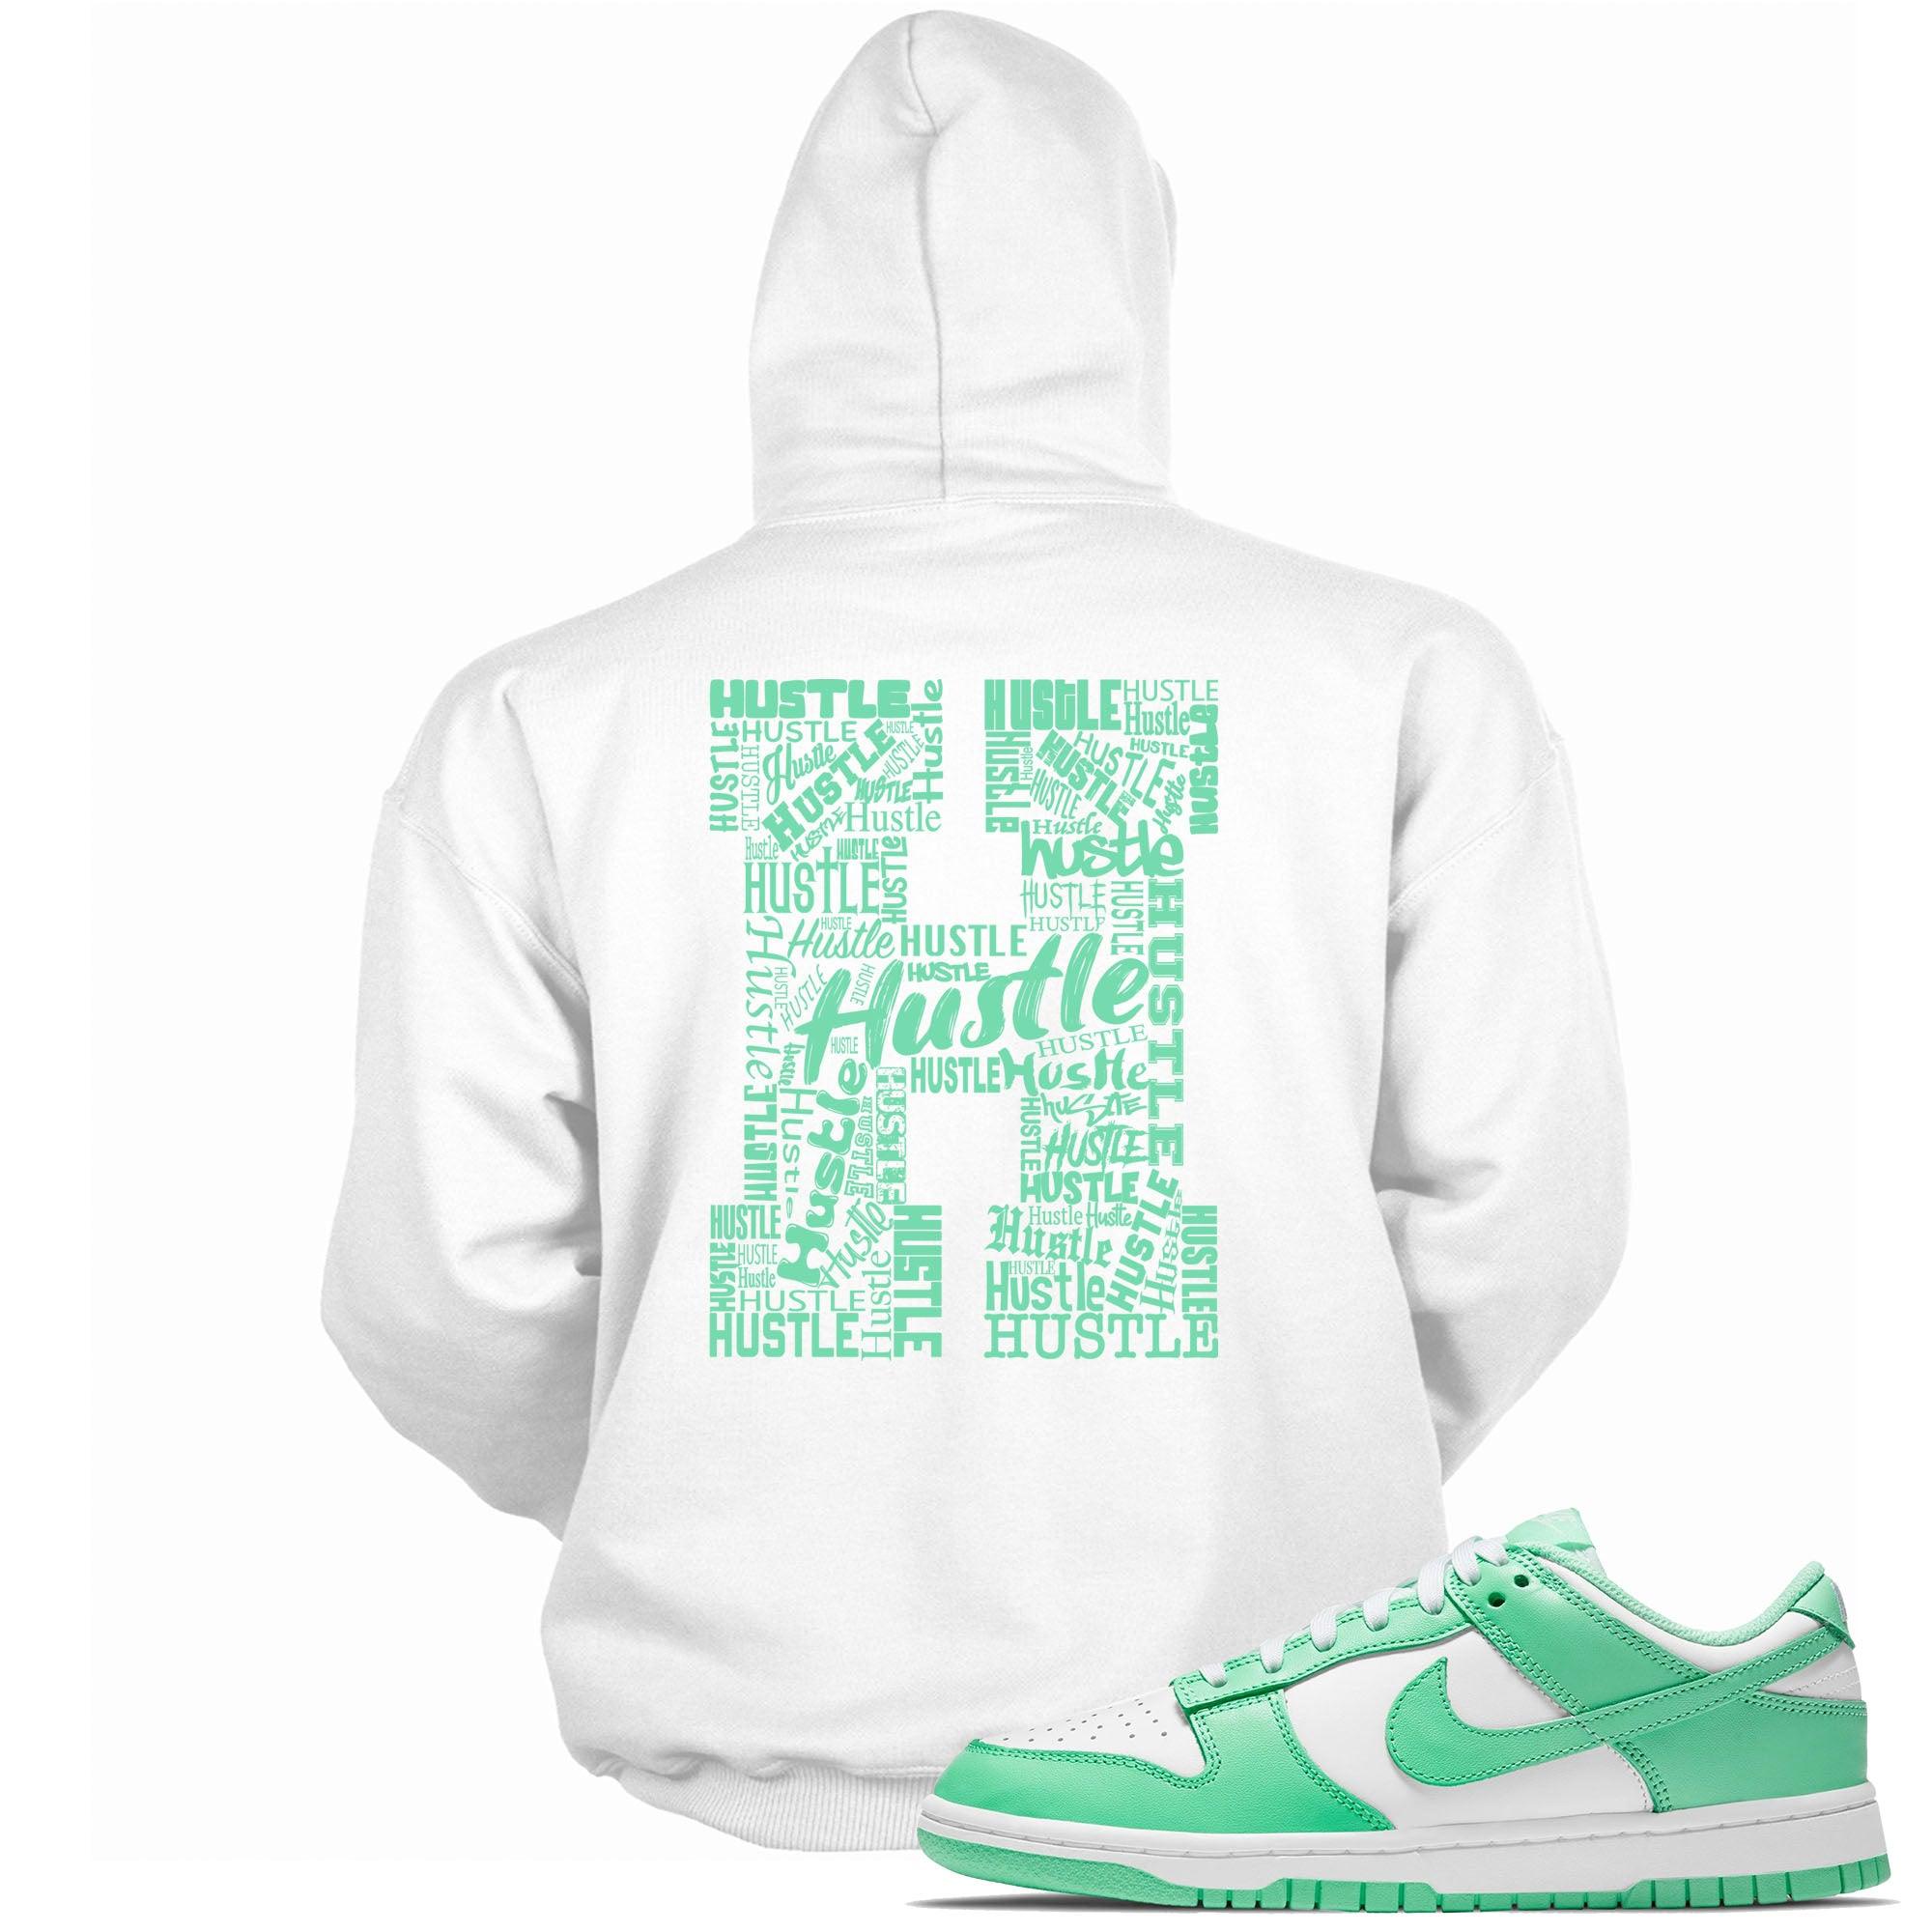 Cool White Graphic Hoodie with “ Hustle H “ print, that perfectly matches Nike Dunk Green Glow sneakers